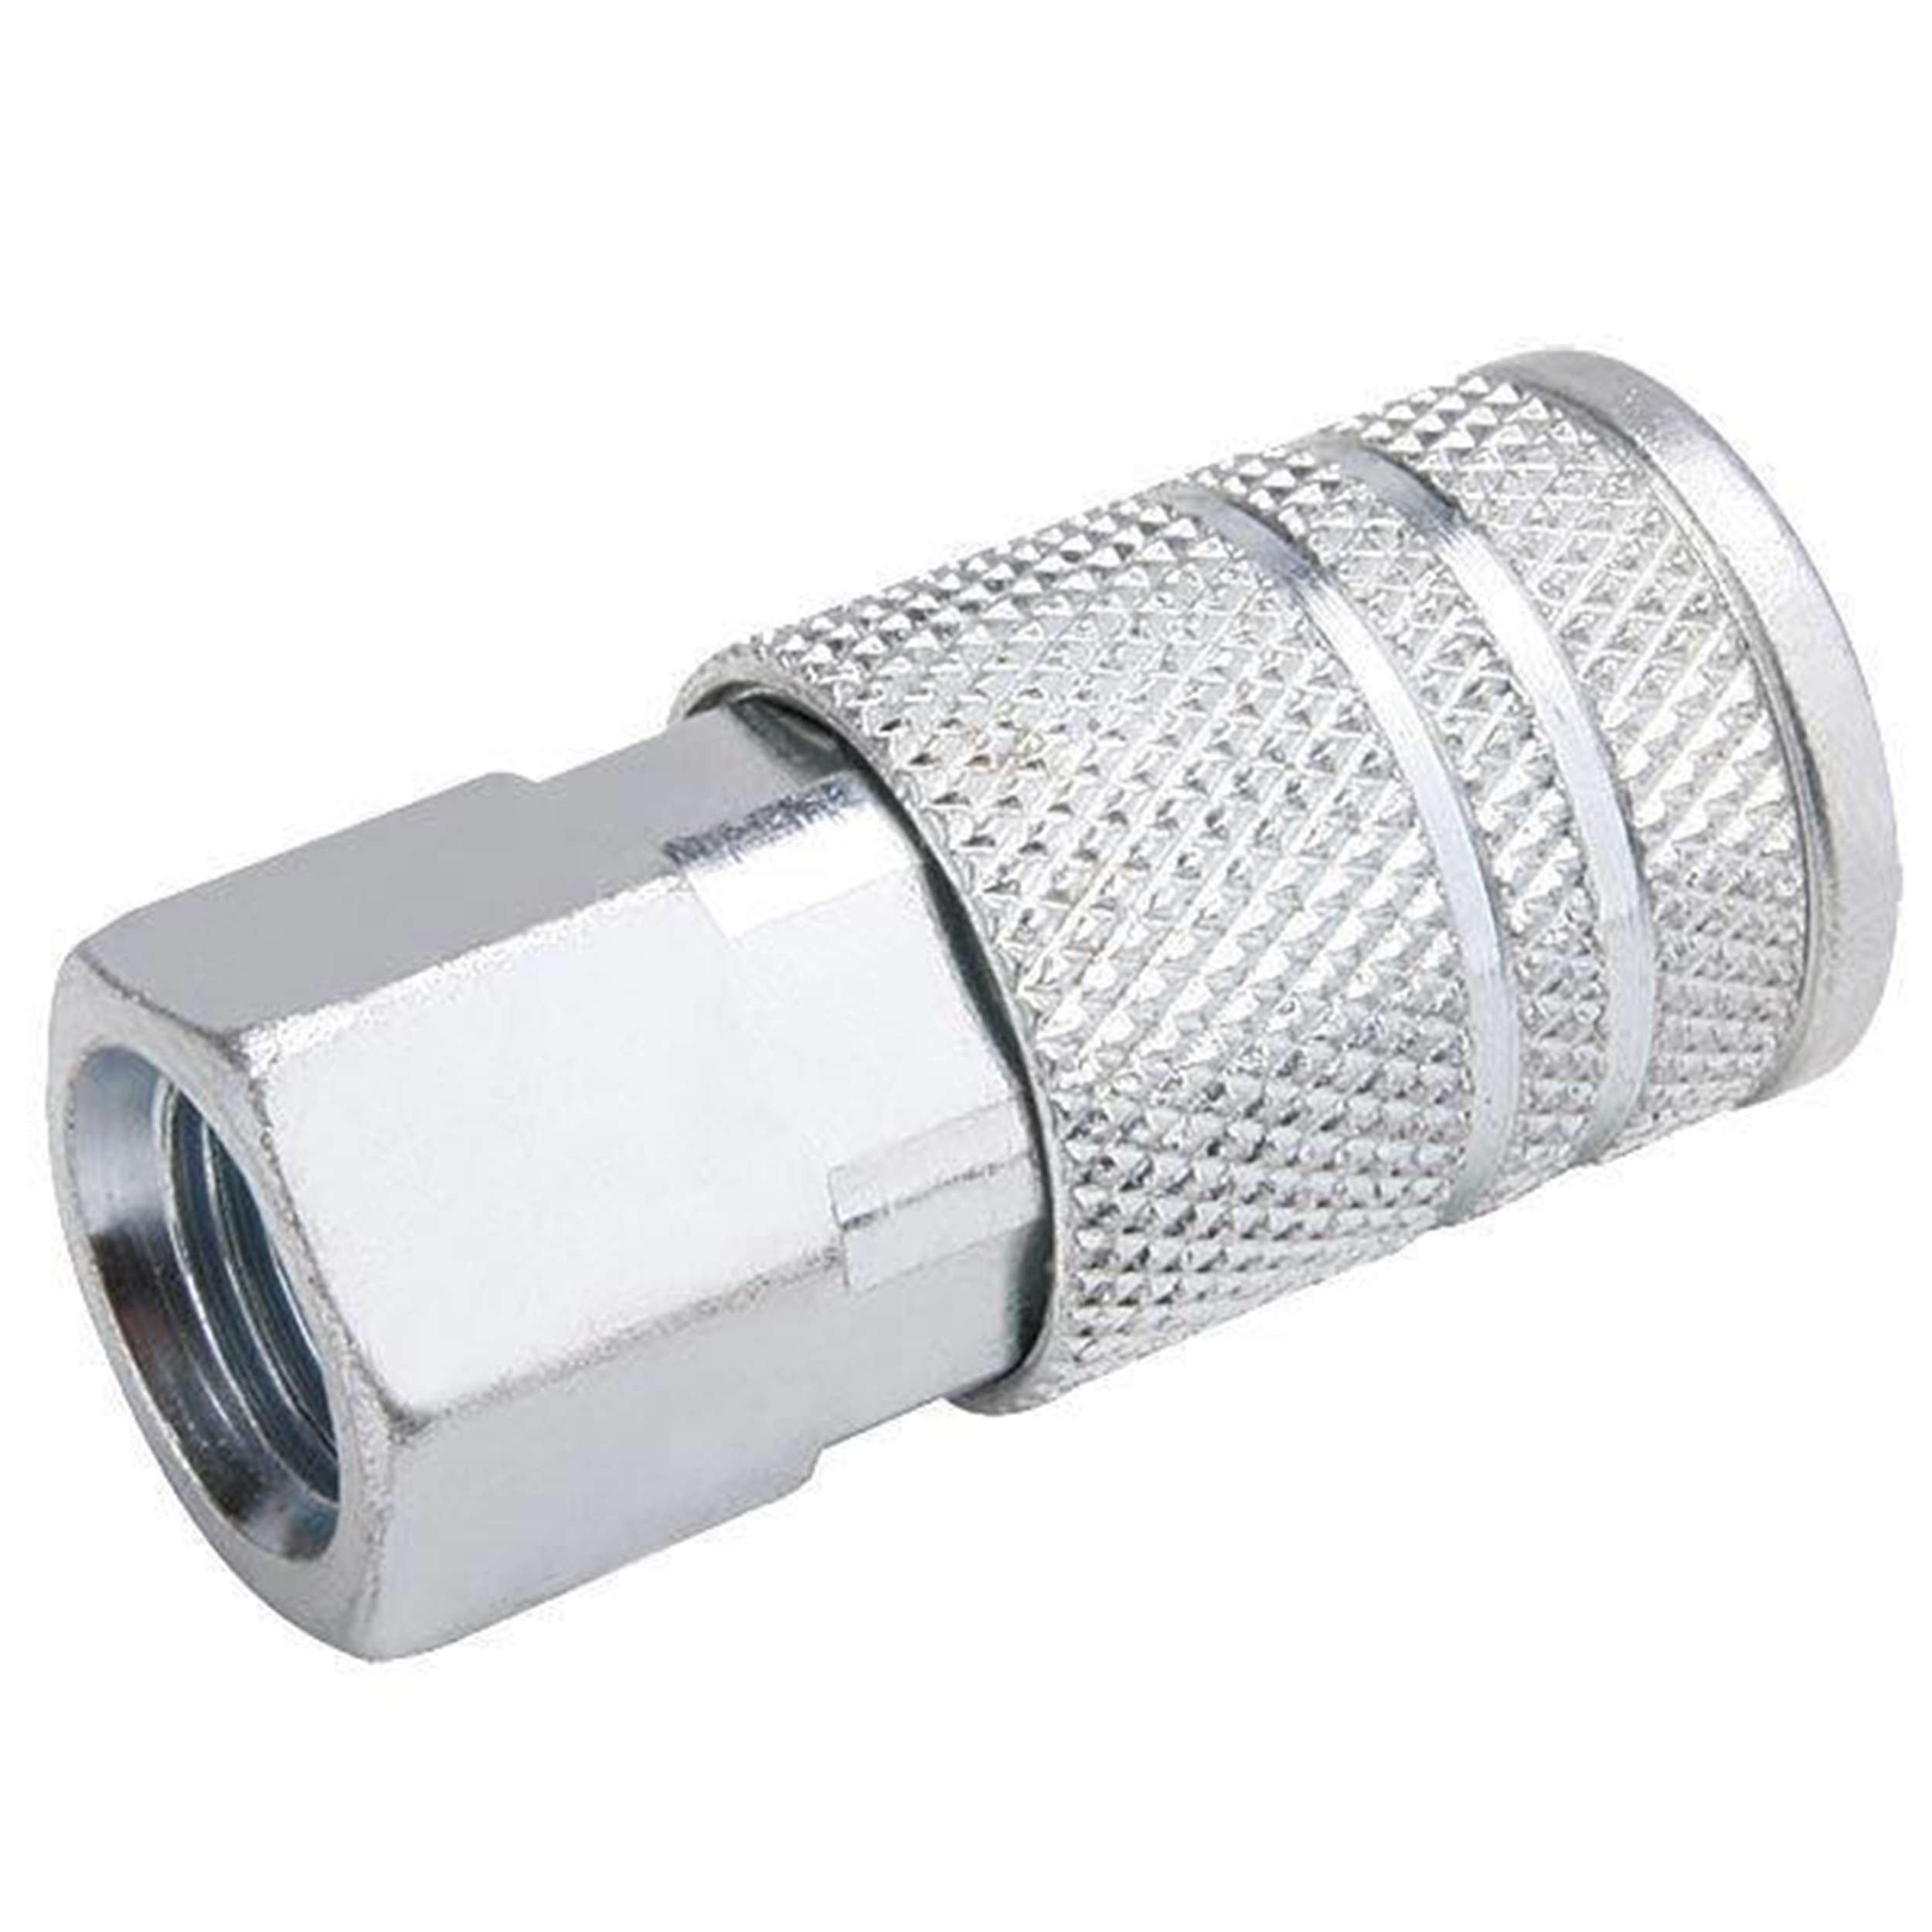 1/4-inch Industrial Air Coupler With Female 1/4-inch Npt